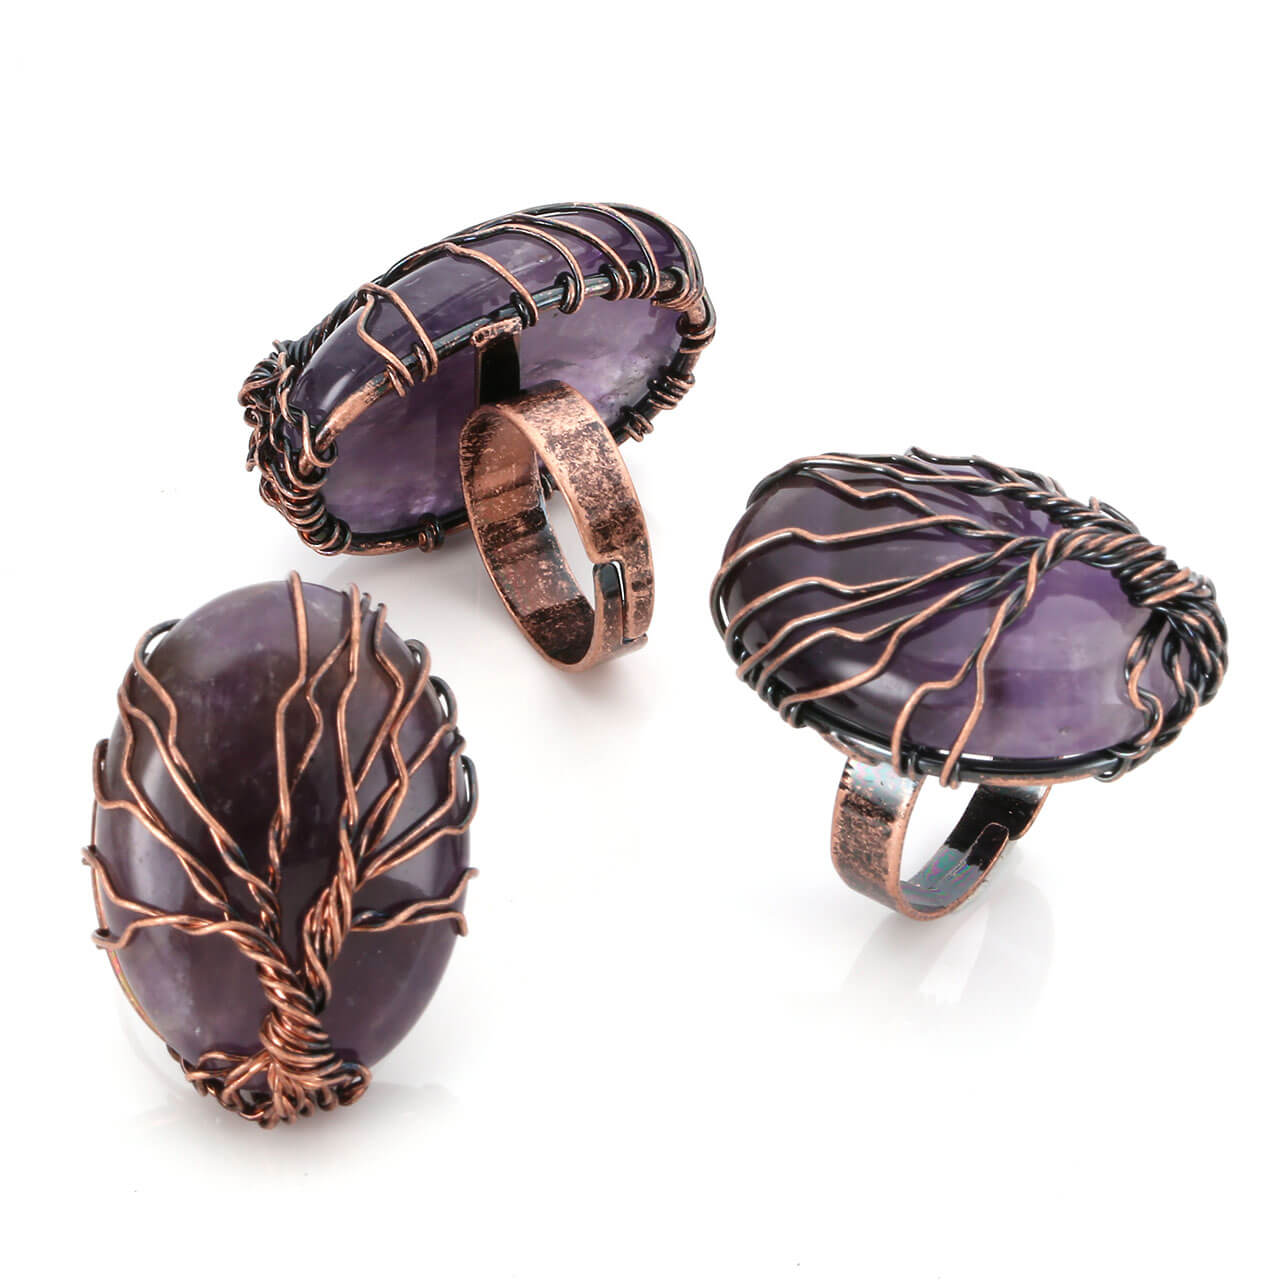 jkr012401 copper wires wrapped amethyst gemstones ring for women daily use